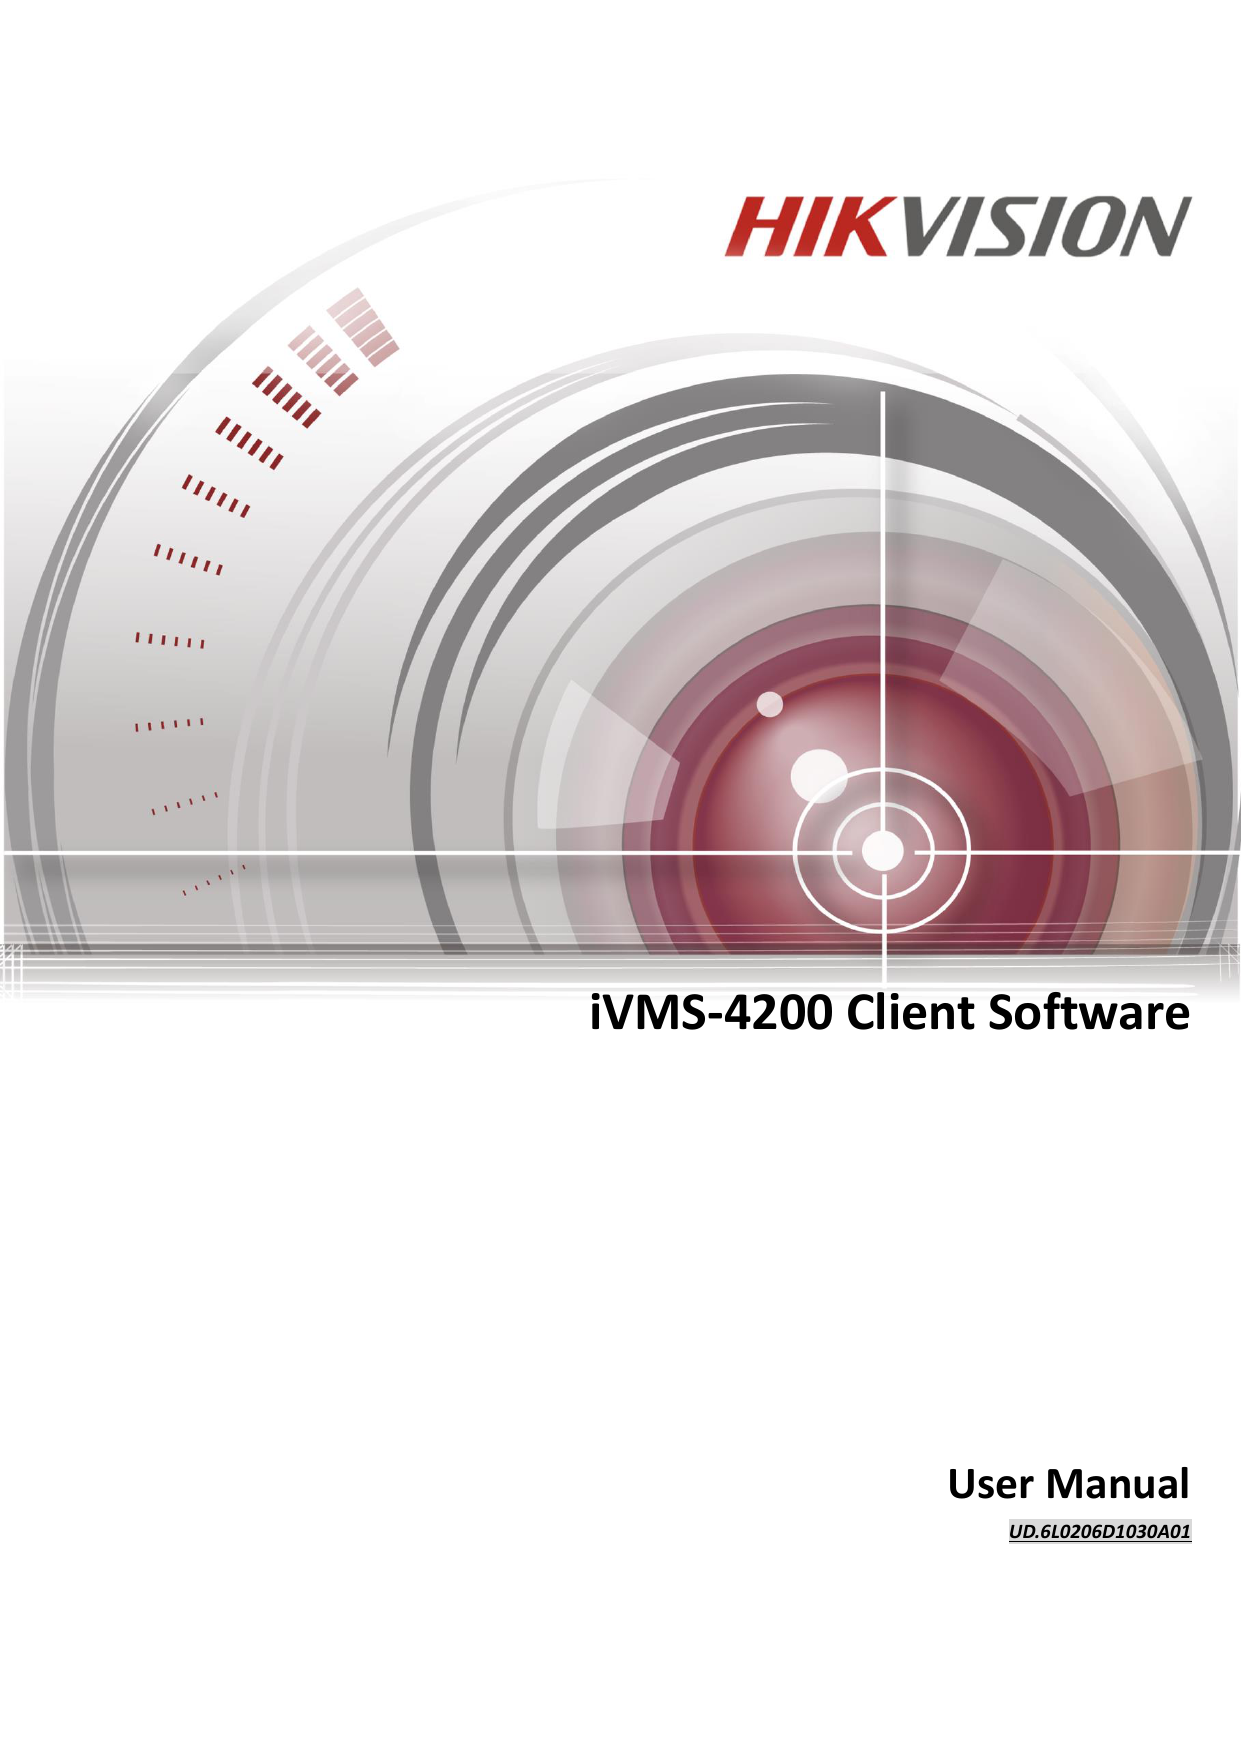 no video on ivms 4200 client